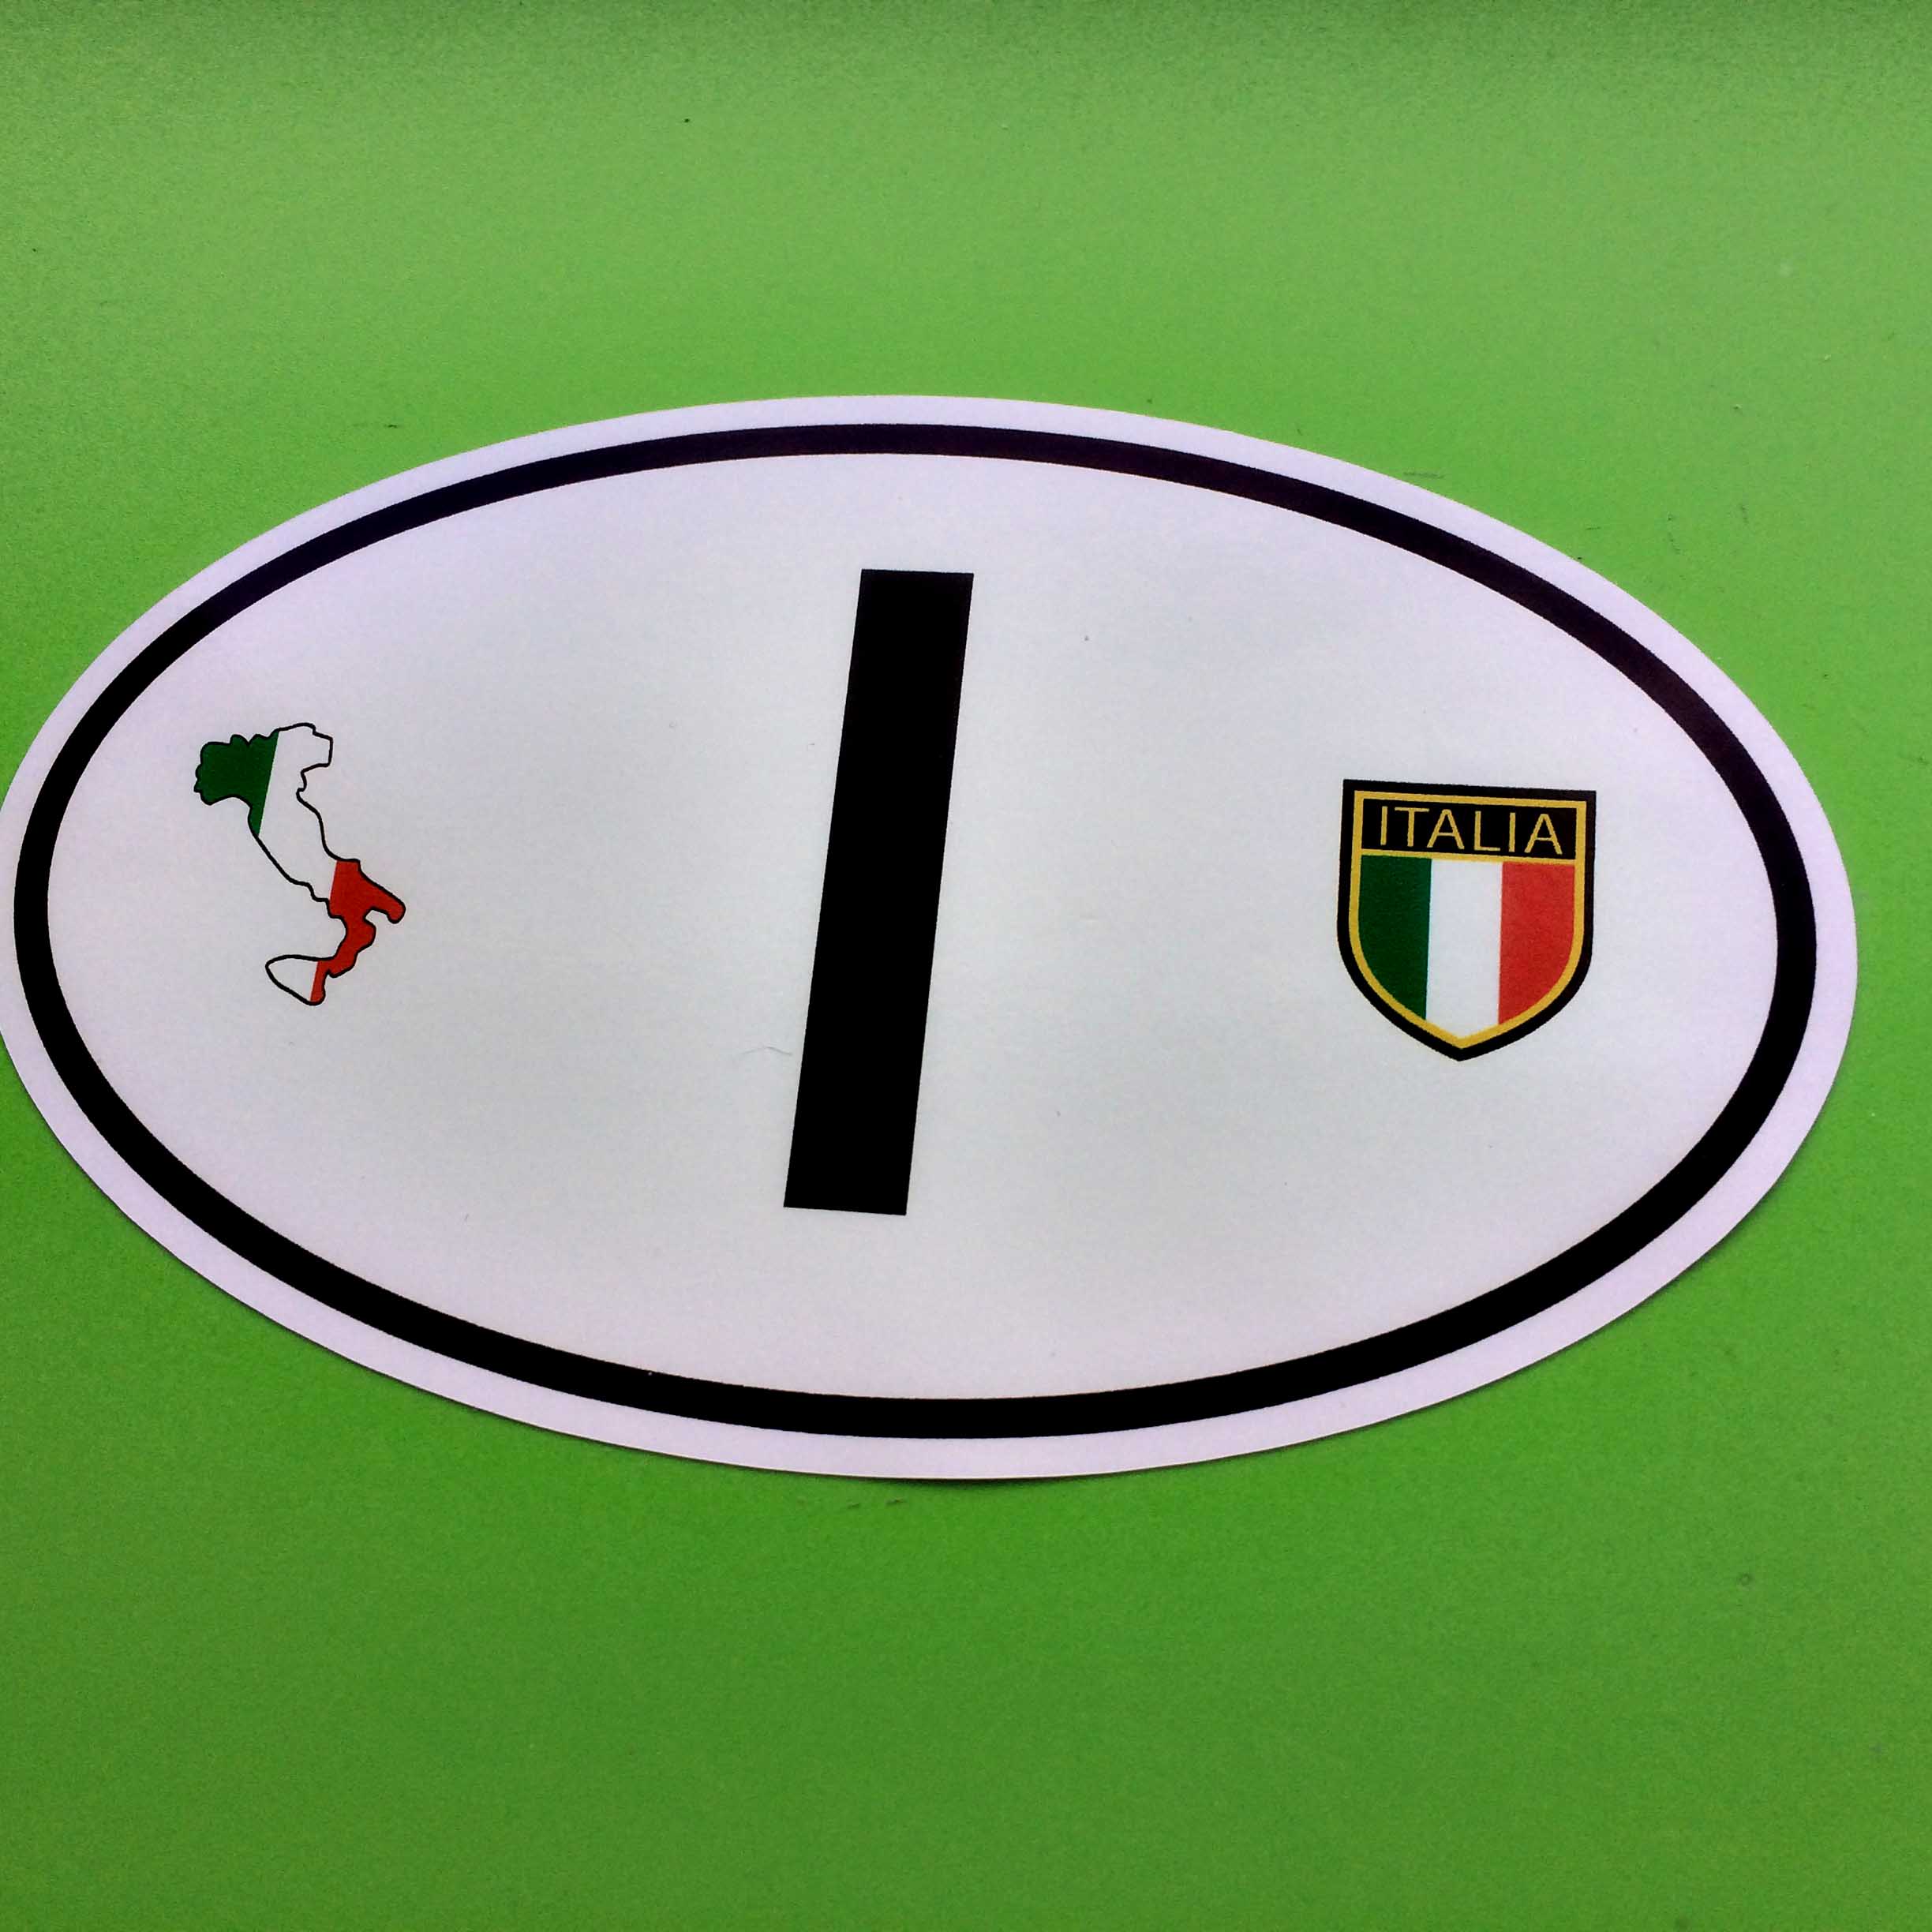 A white oval sticker with a black border. The letter I in black sits between a map of Italy in national colours and a shield - a vertical tricolour of green, white and red with Italia in gold lettering on a black background.